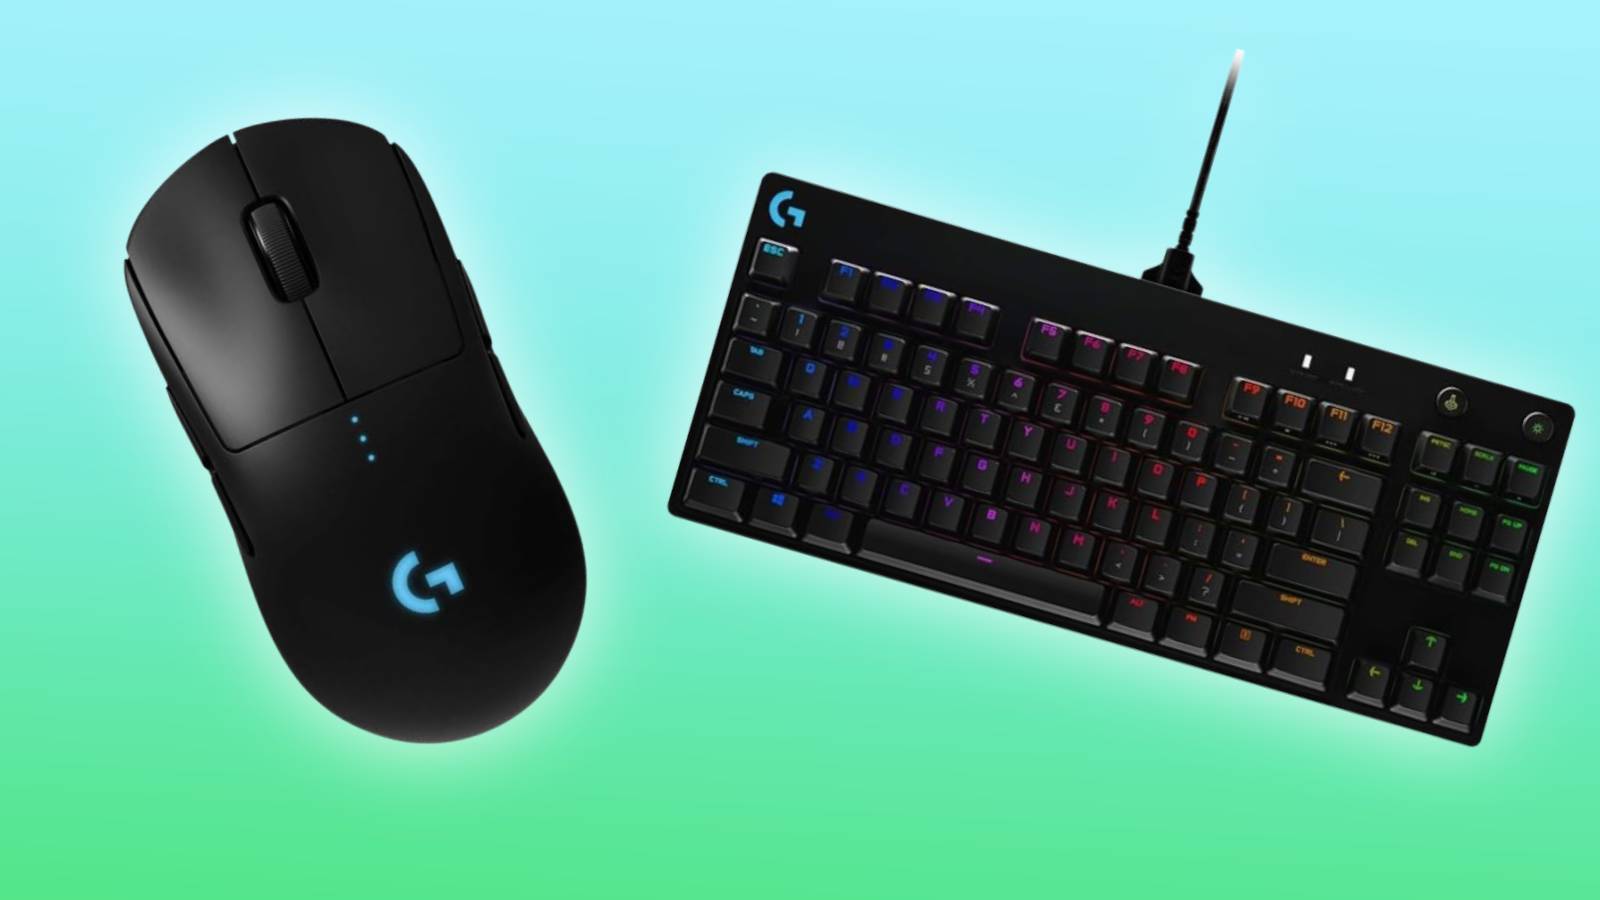 Image of the Logitech G Pro Wireless Gaming Mouse & G PRO Mechanical Gaming Keyboard.